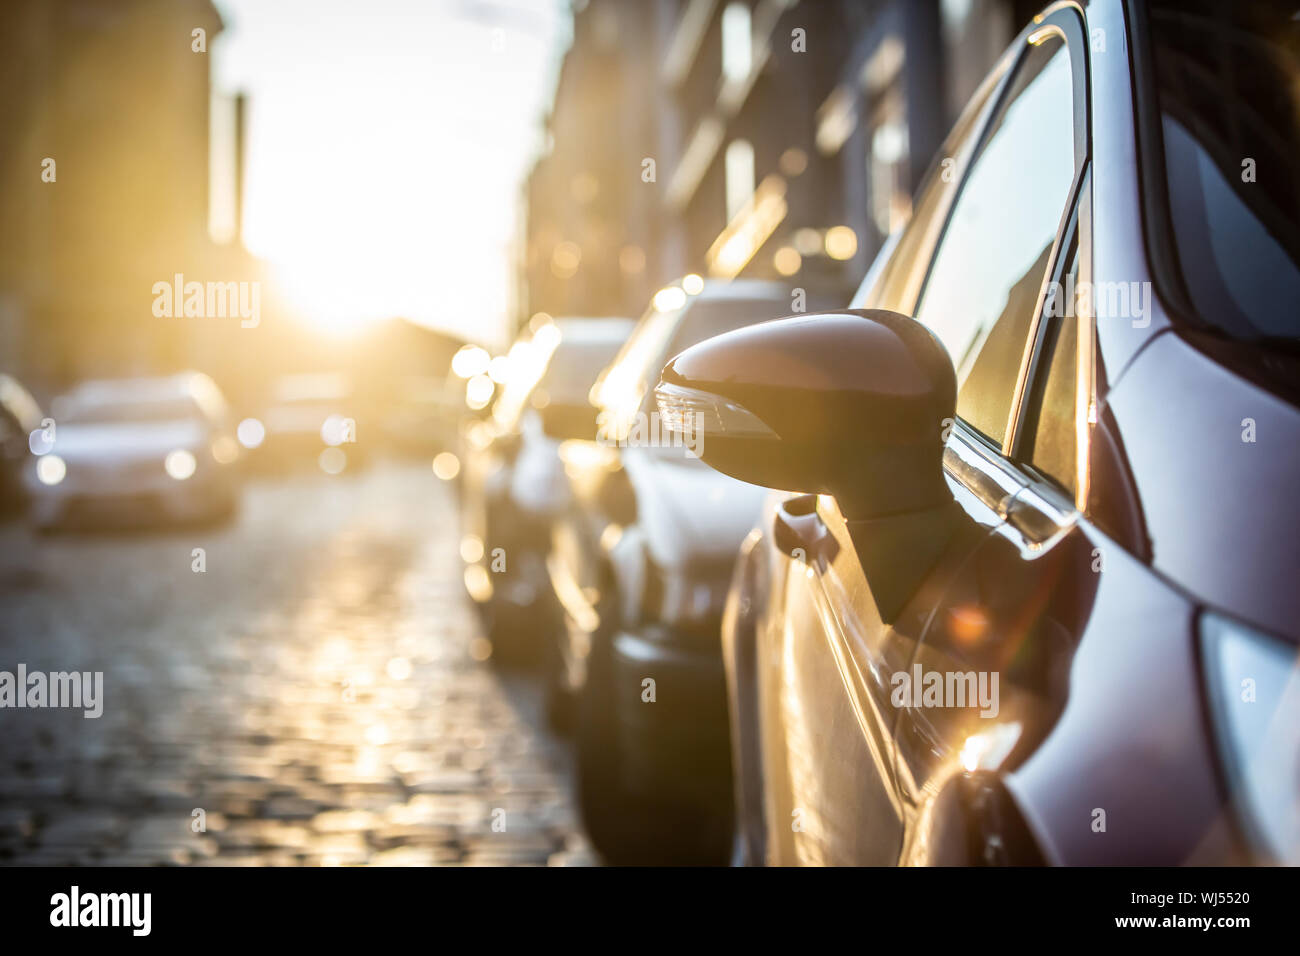 Cars parked on the side of the road, with sunset background. Stock Photo